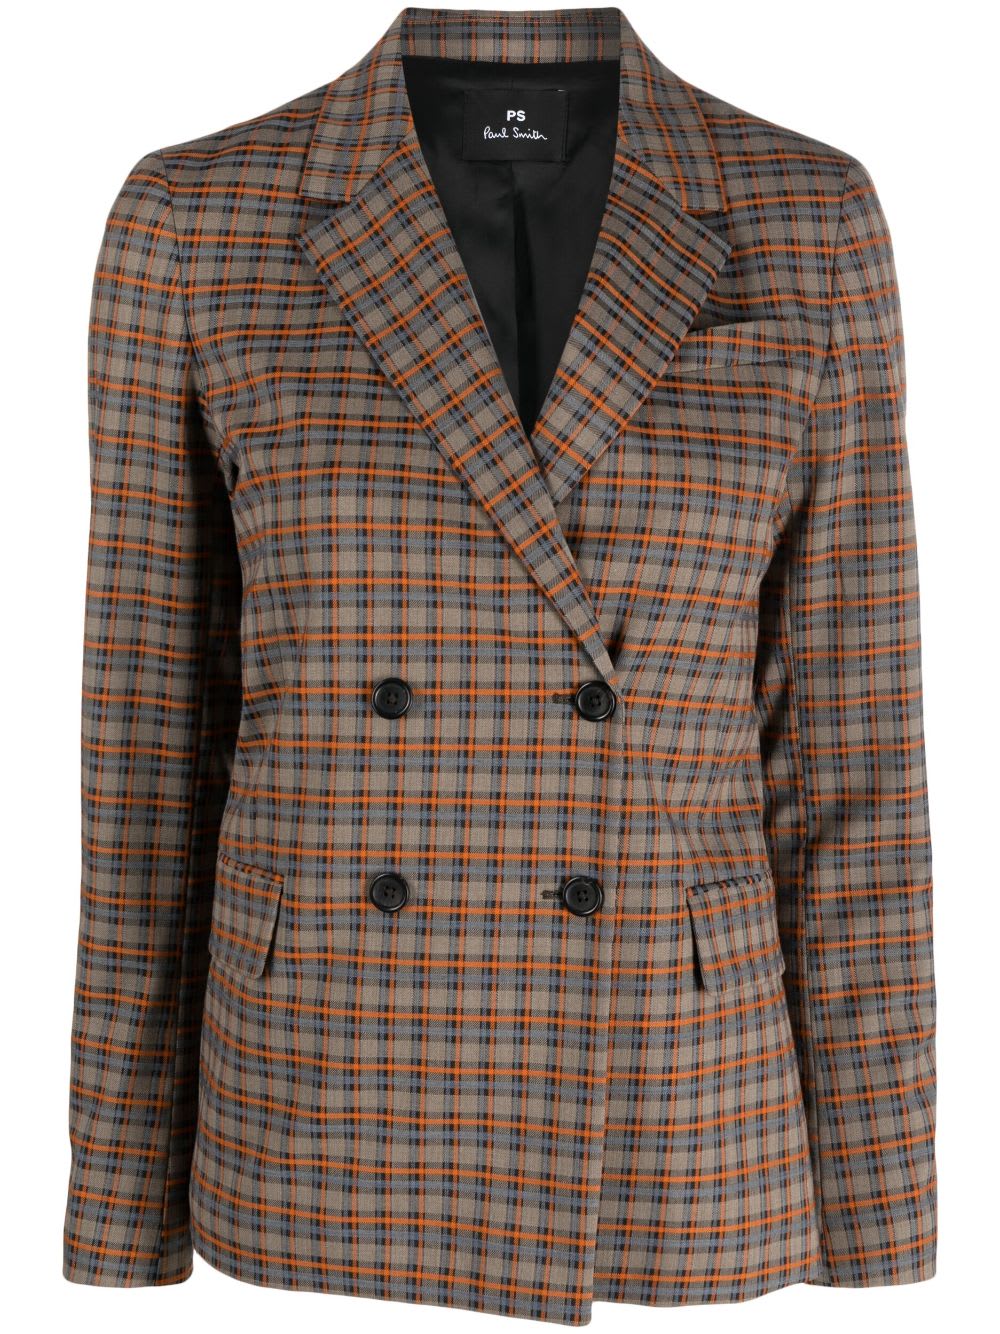 PS BY PAUL SMITH CHECKED DOUBLE BREASTED JACKET